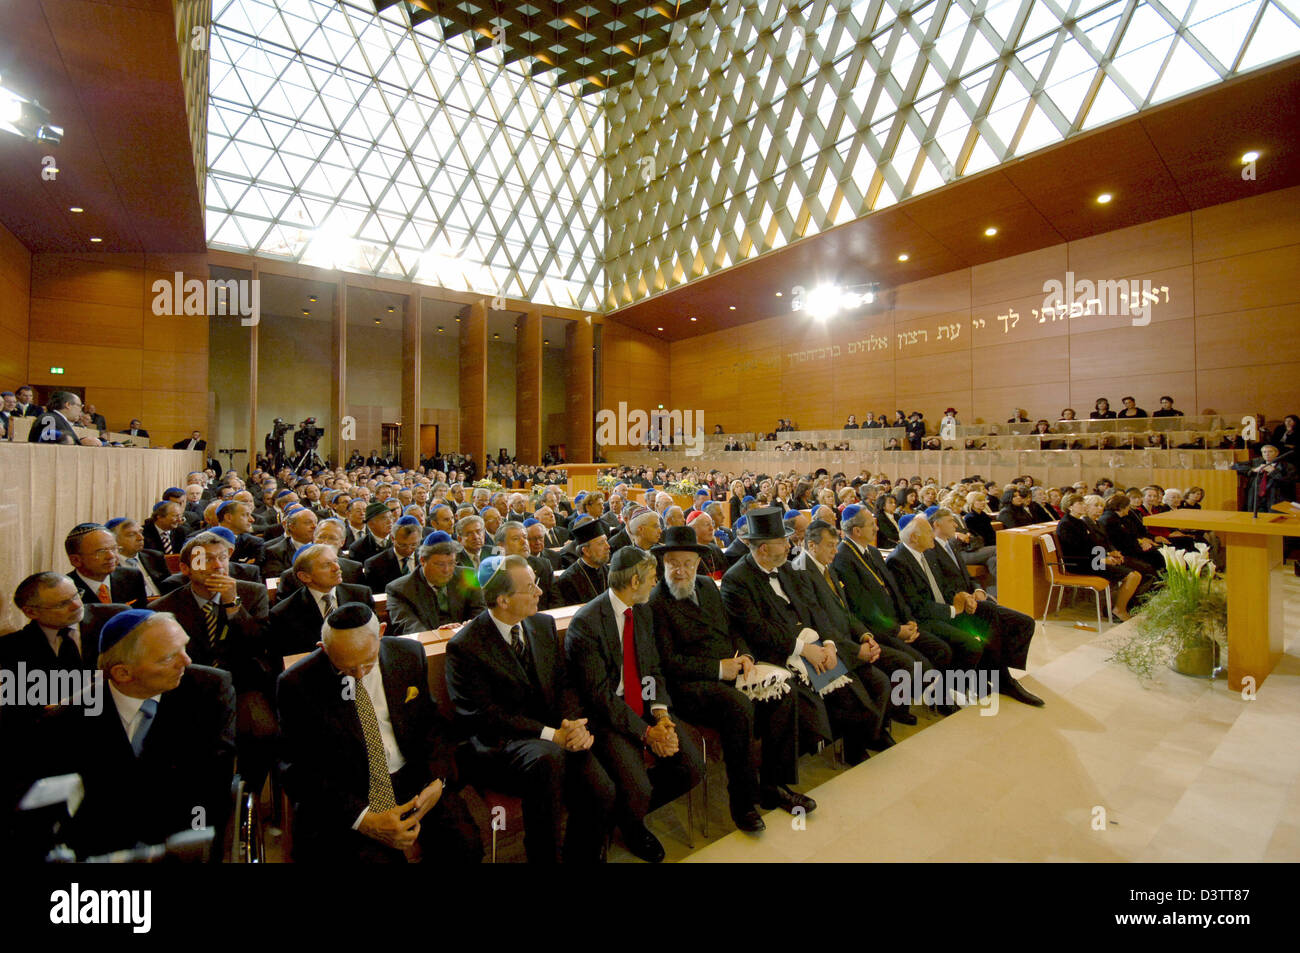 The picture shows the interior of the new main synagogue during its ceremonial opening in Munich, Germany, Thursday, 09 November 2006. The synagogue had been destroyed by the Nazis five months prior to the 'Pogromnacht', the Night of Broken Glass in 1938. 1200 guests were invited to attend the reopening, among them Prime Minister of Bavaria and many high representatives of Judaism  Stock Photo